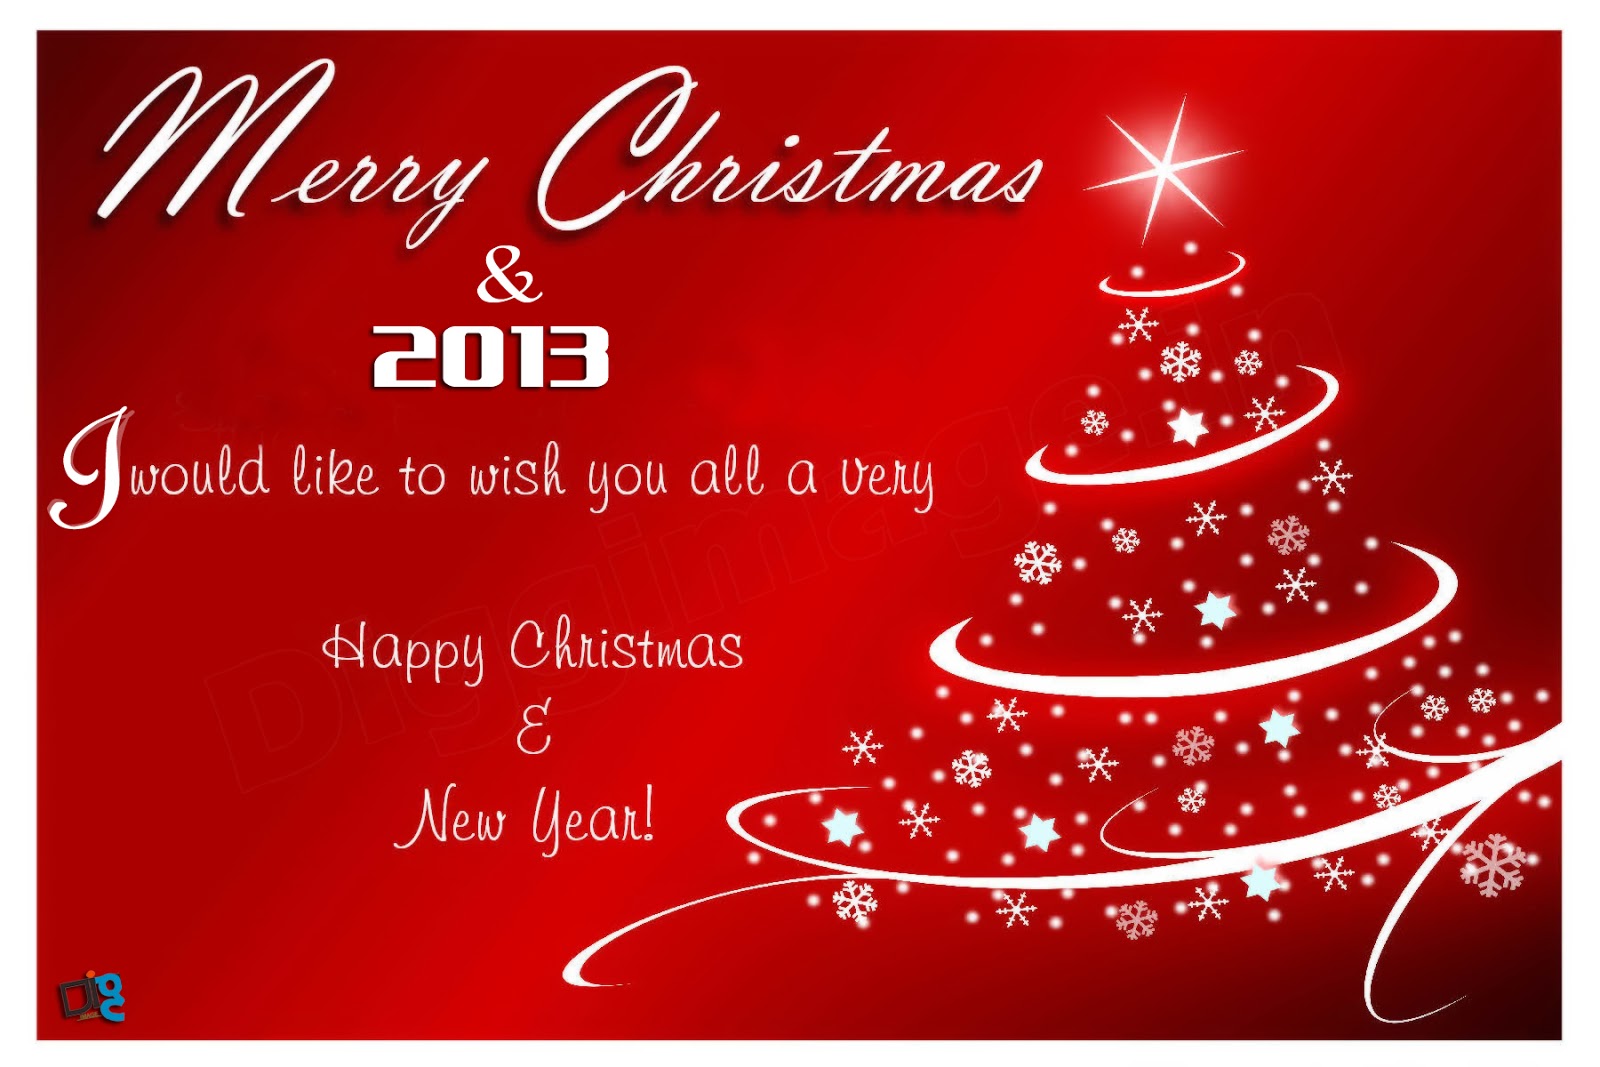 I would like to wish you all Vey Happy Christmas & New 